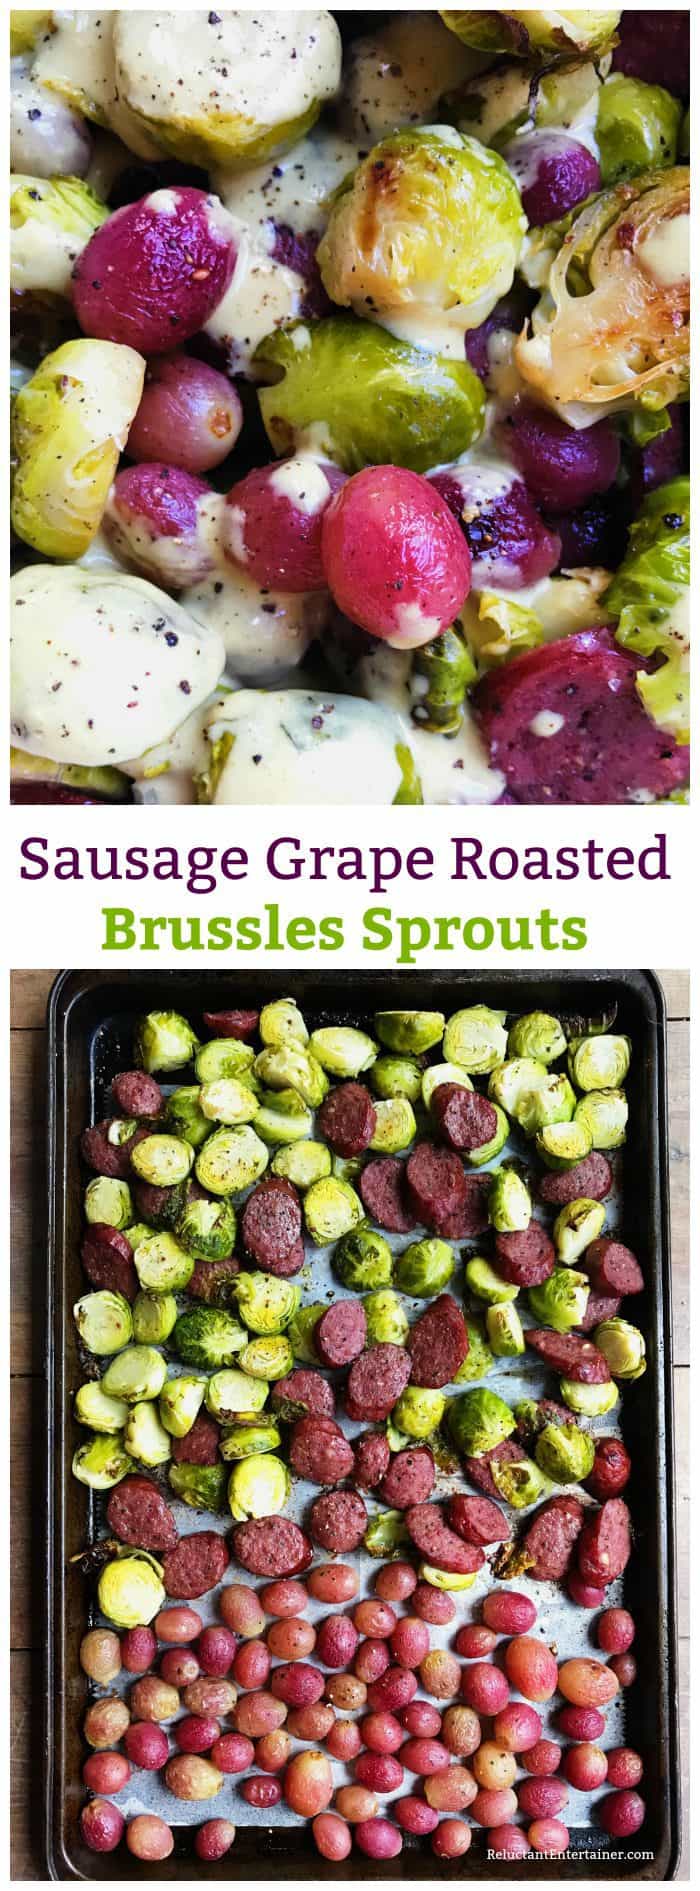 Sausage Grape Roasted Brussles Sprouts